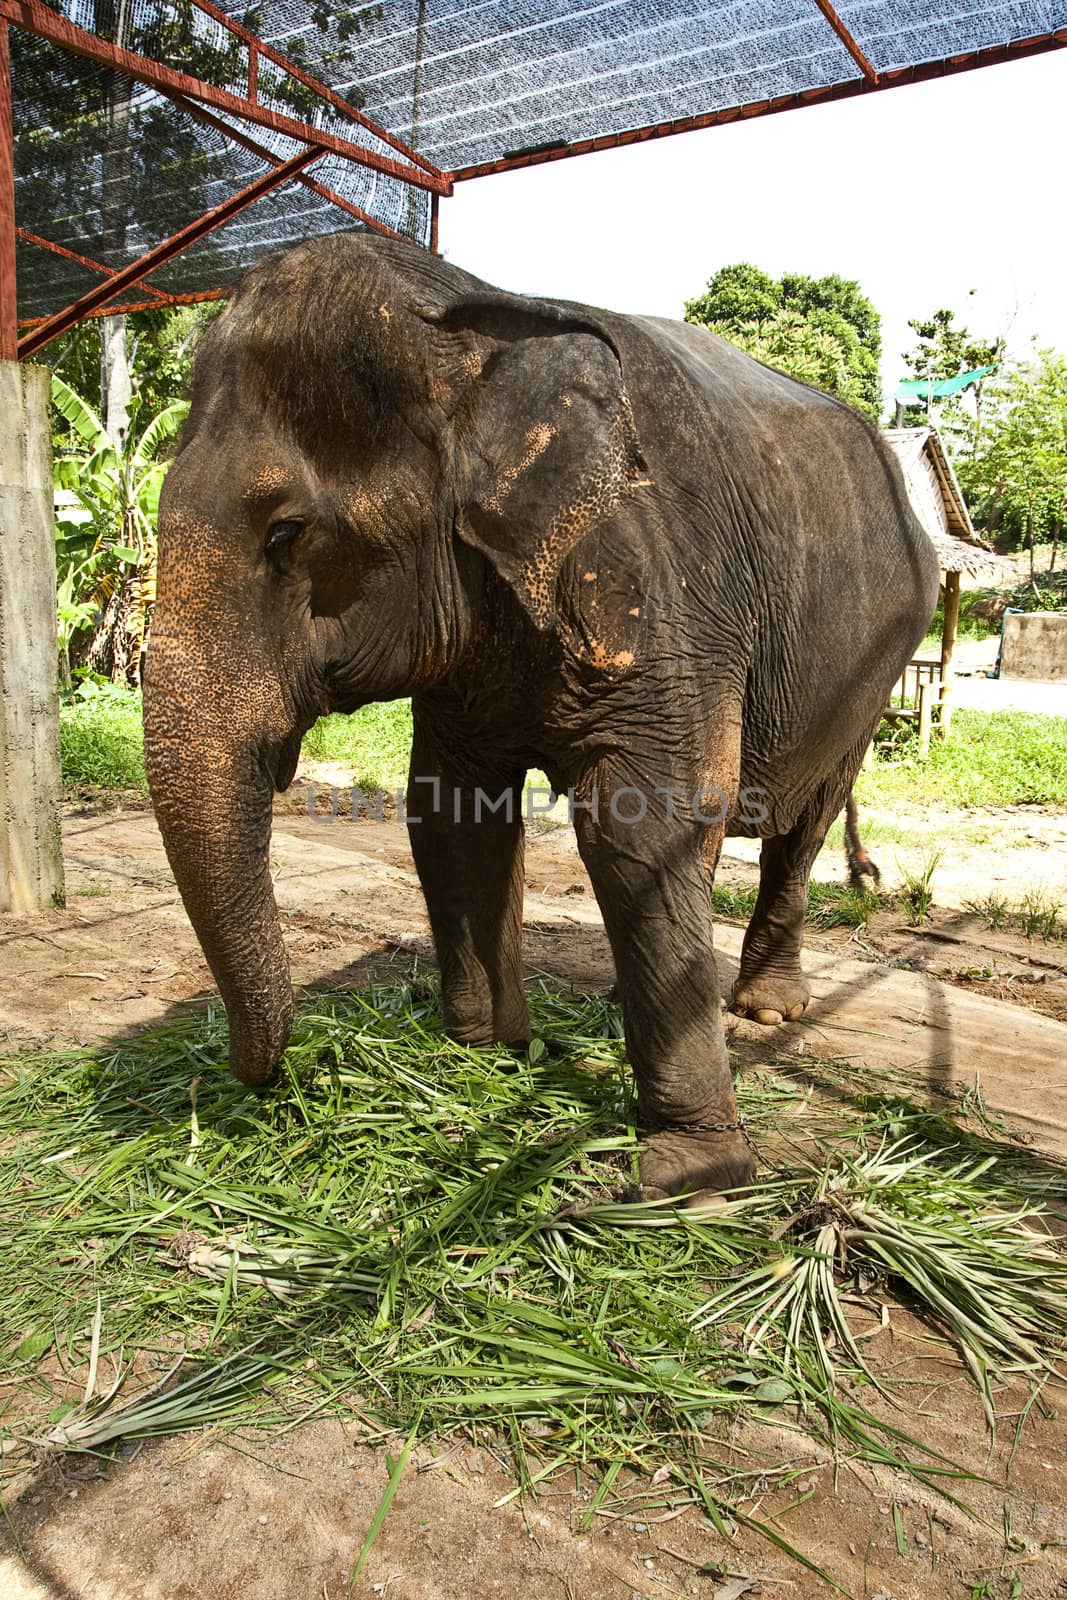 Elephant training in the camp by posterize